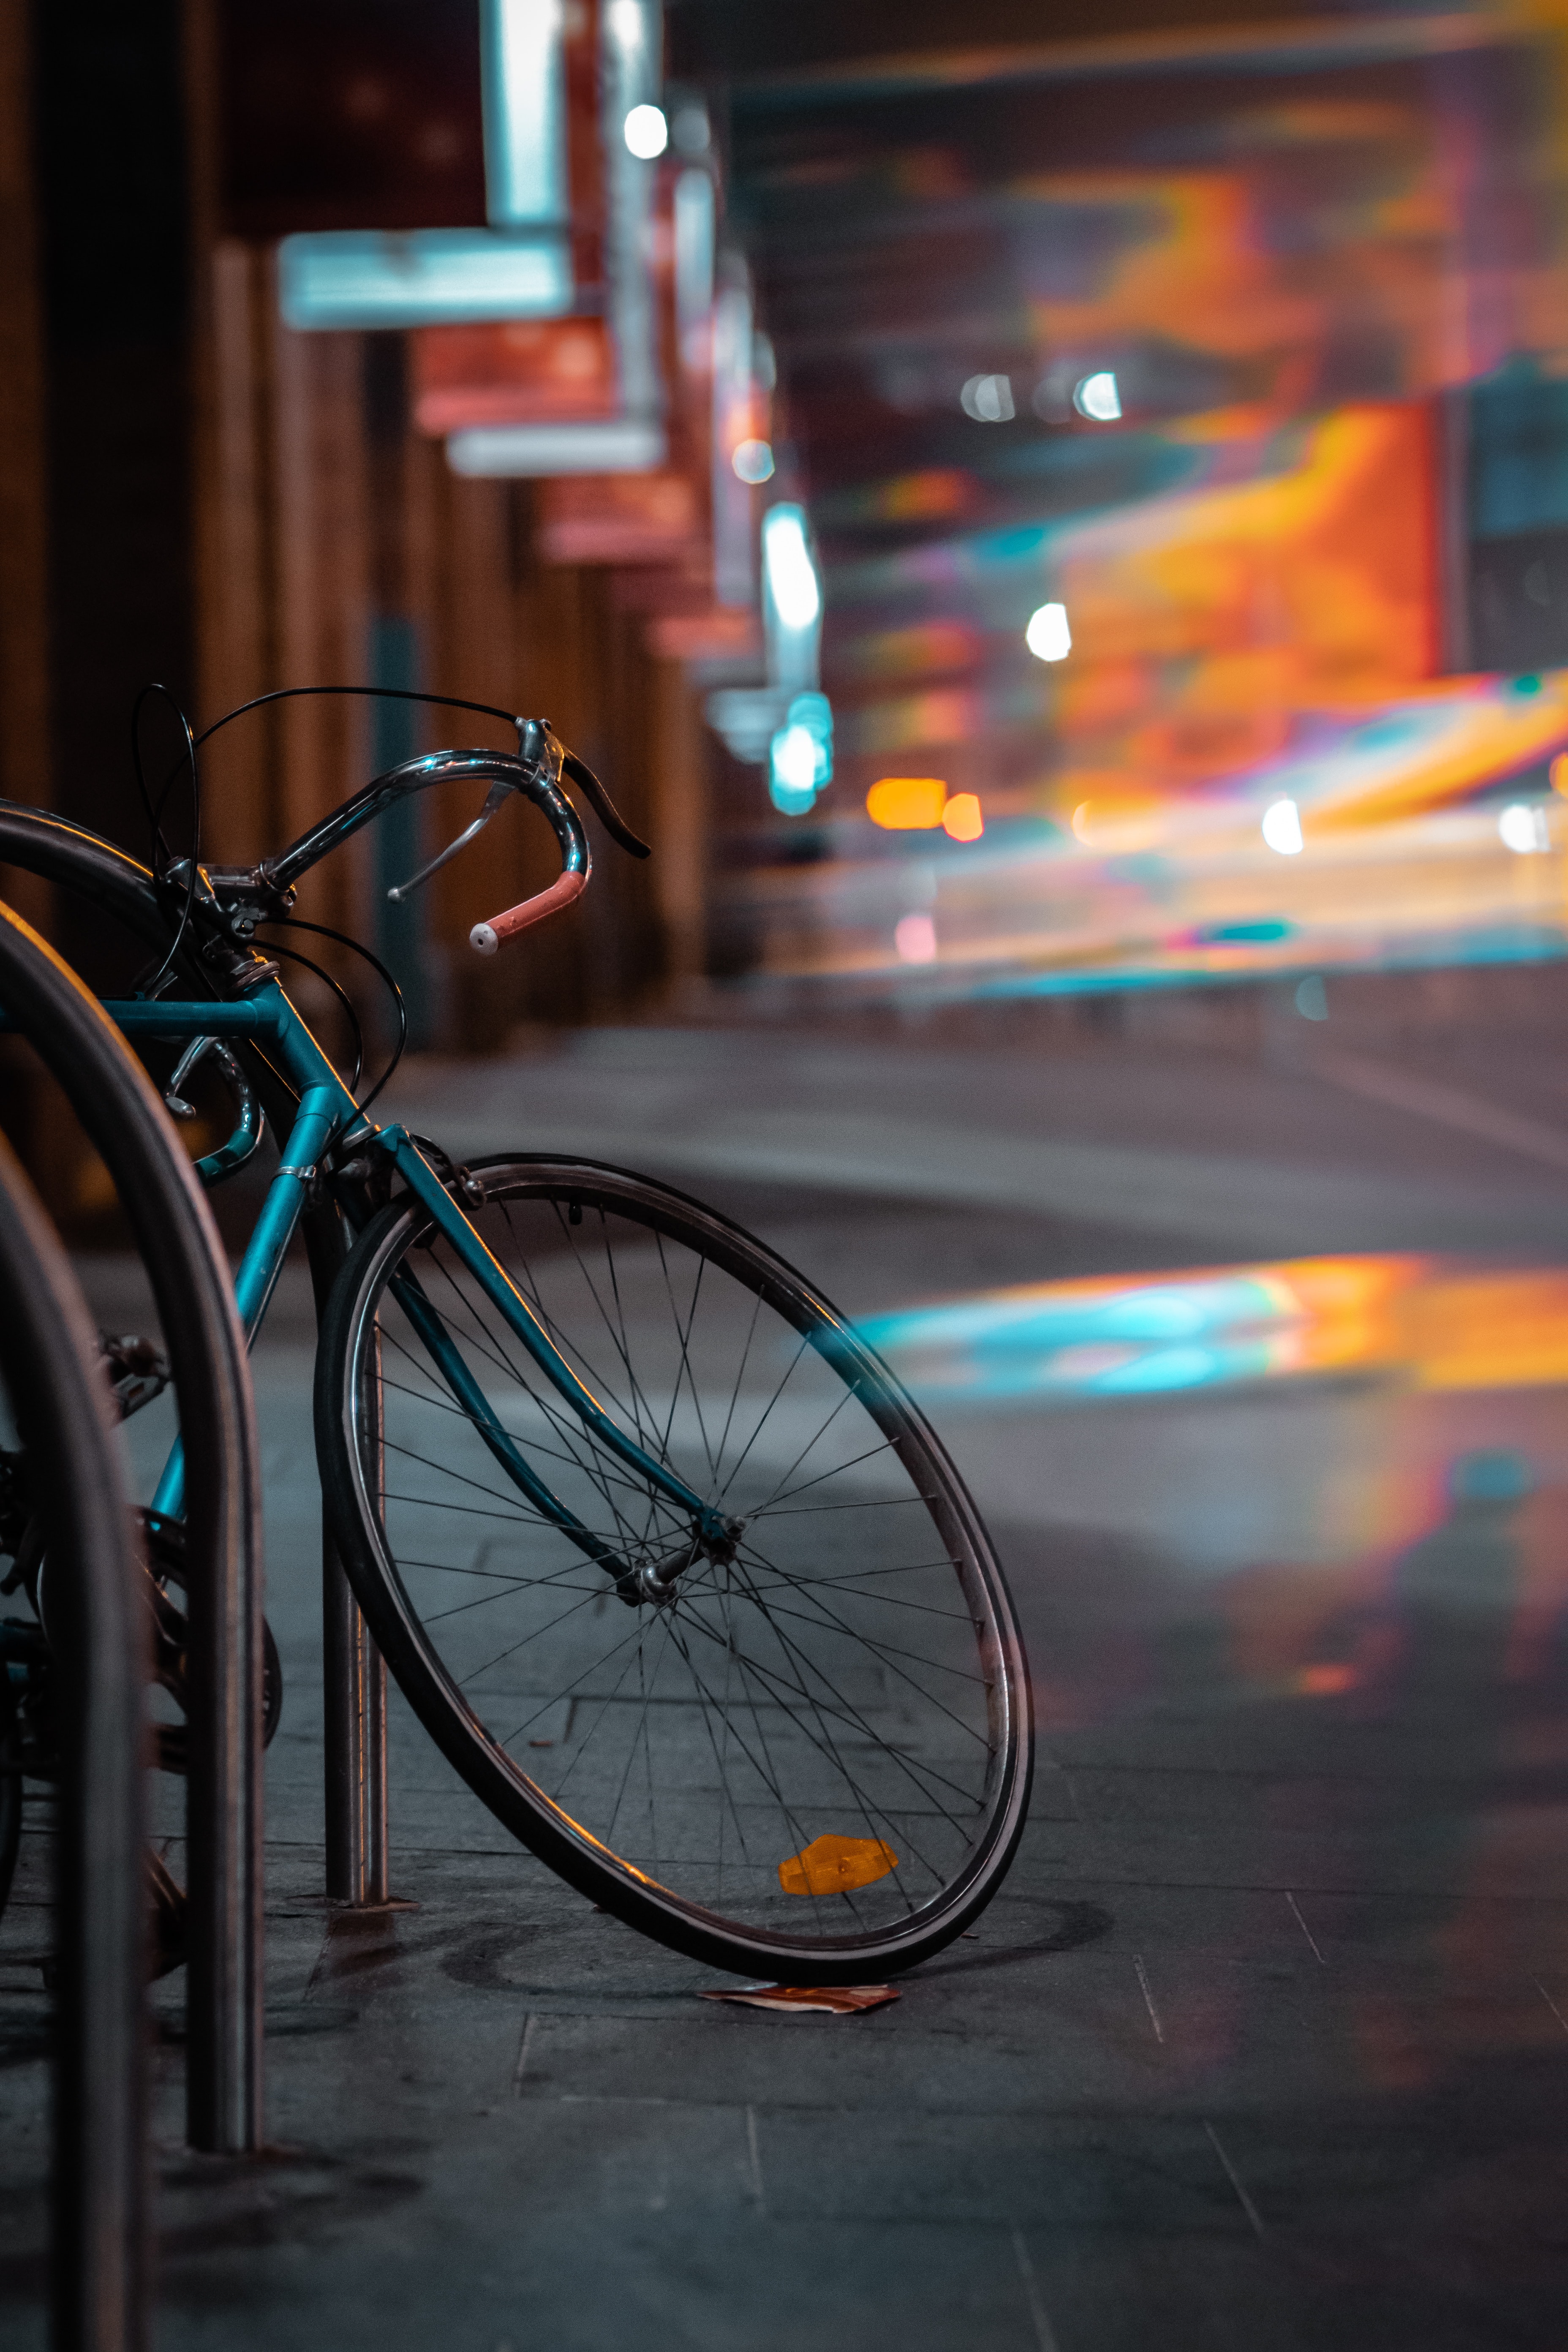 blur, miscellaneous, bicycle, transport, glare, miscellanea, smooth, evening, wheels 1080p